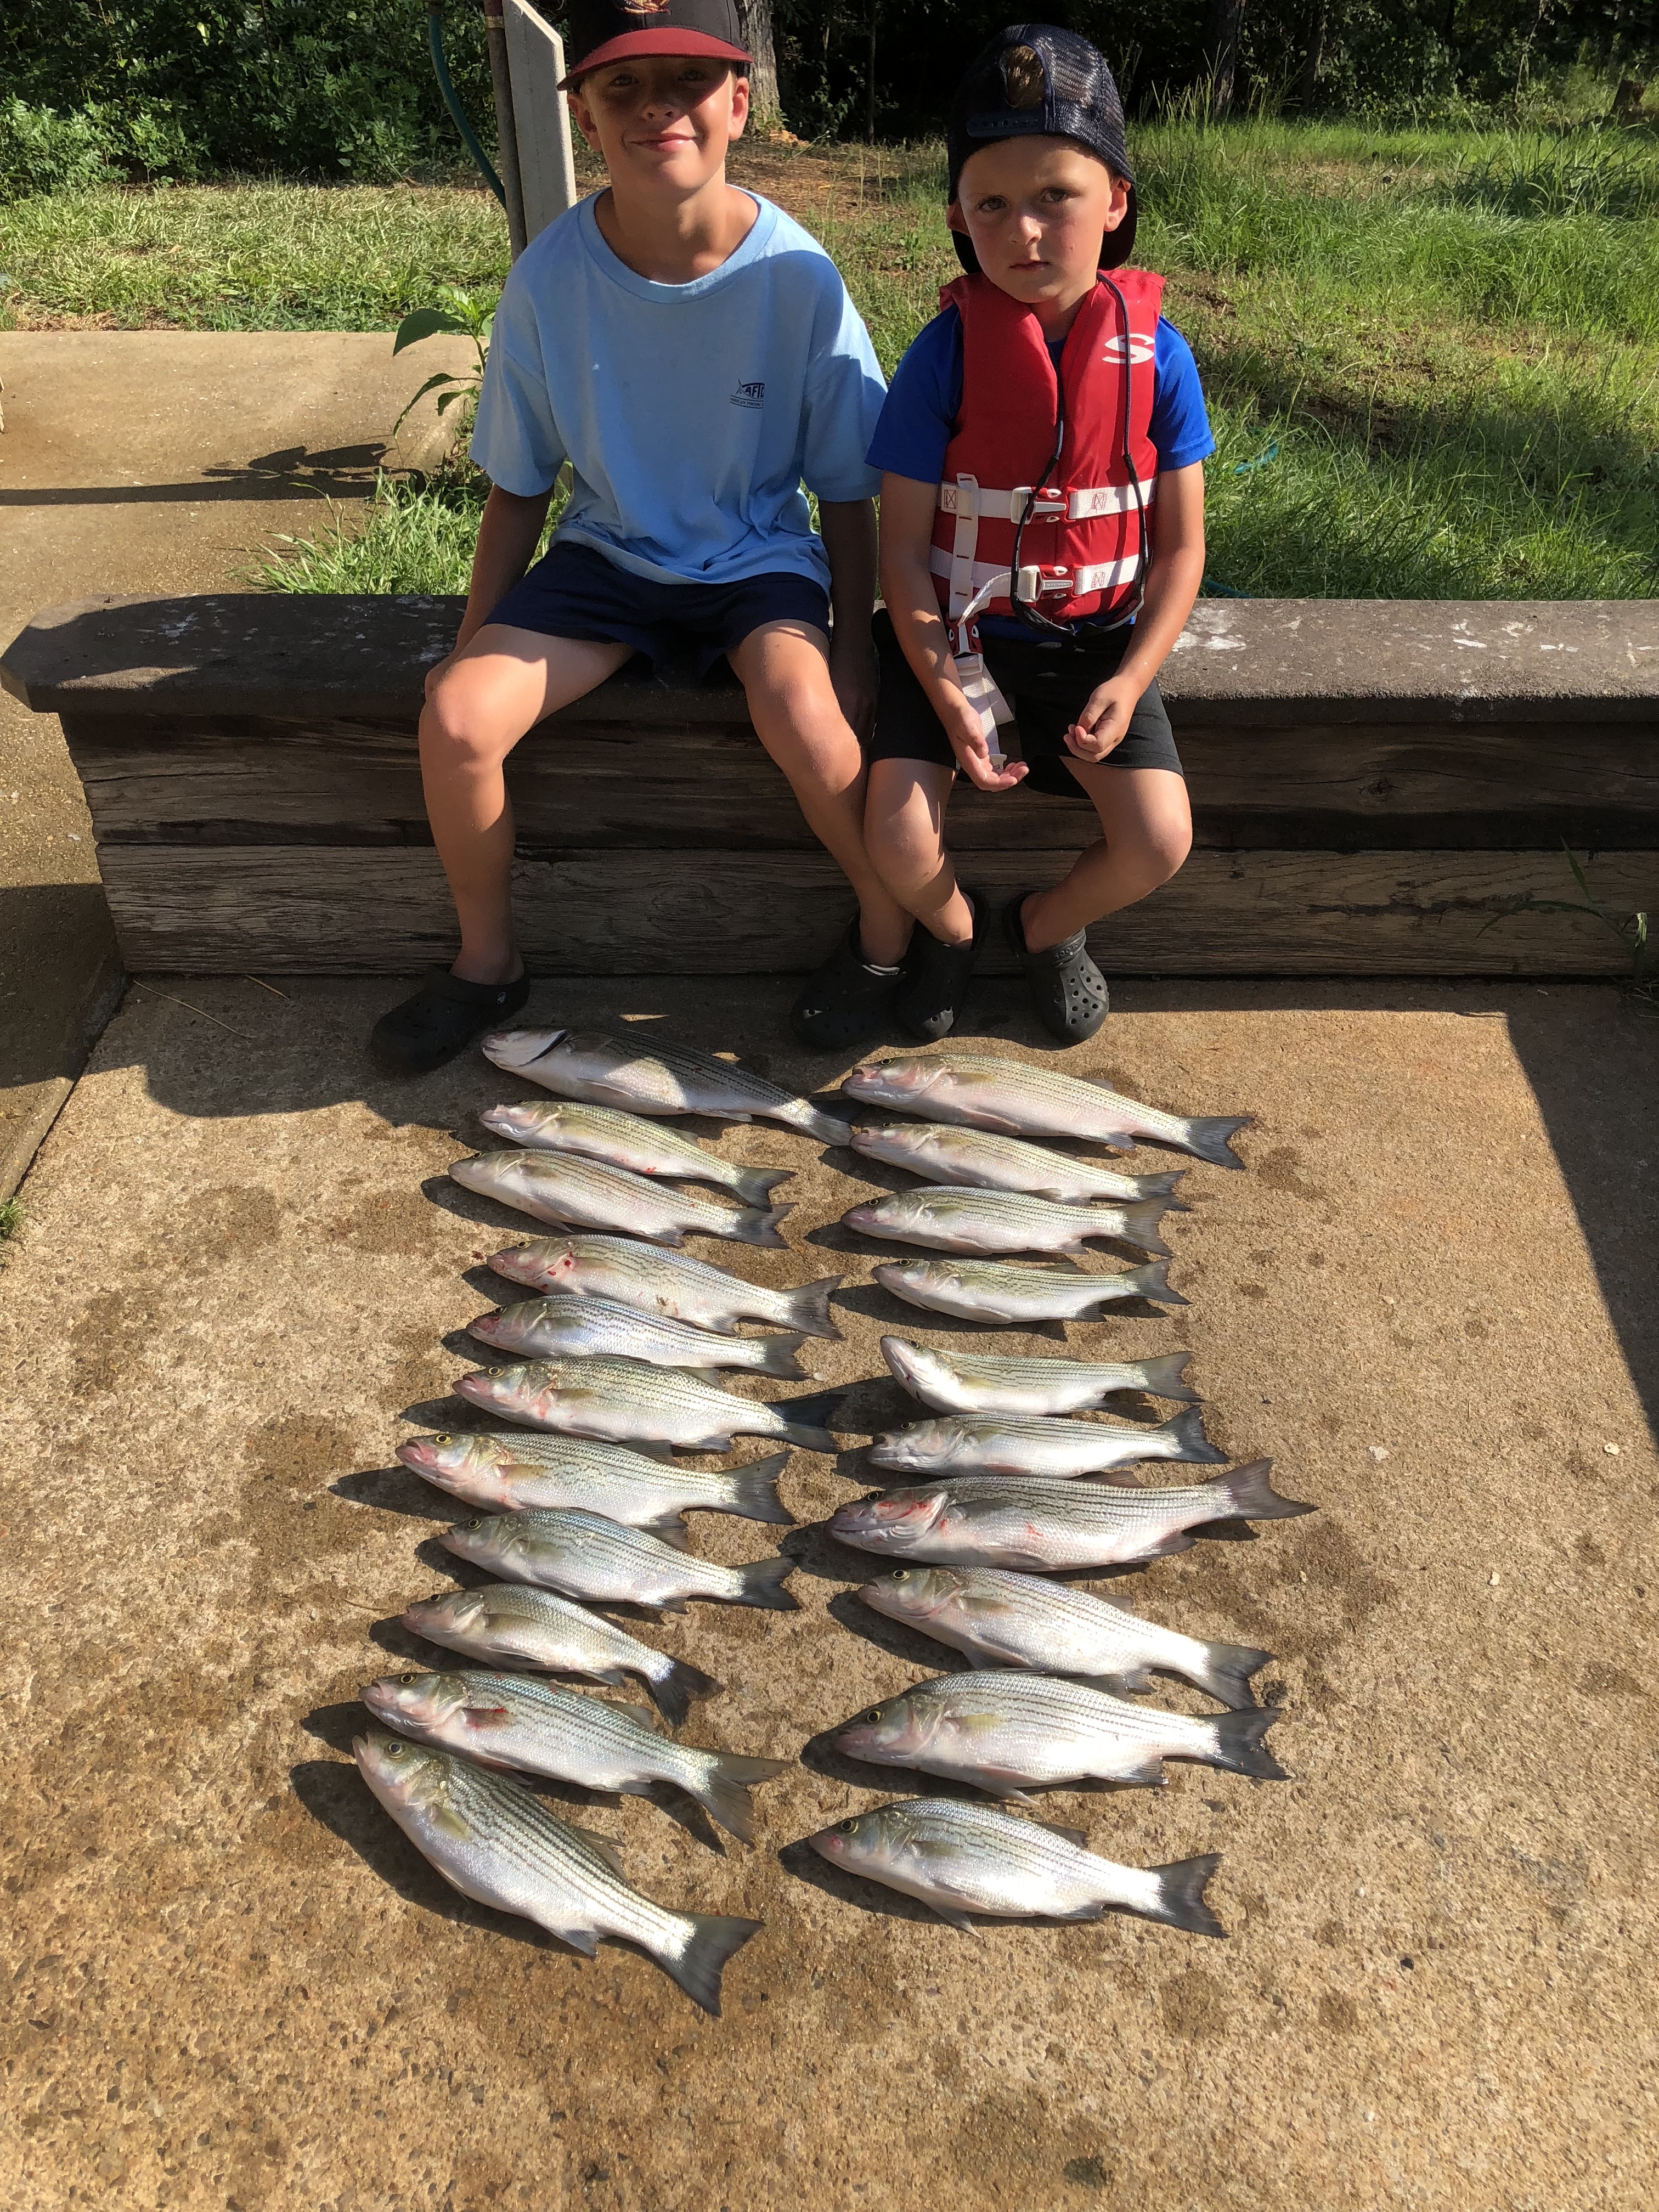 June 20, 2018 Banks and Luke Hopkins with their nice catch. IMG_2190